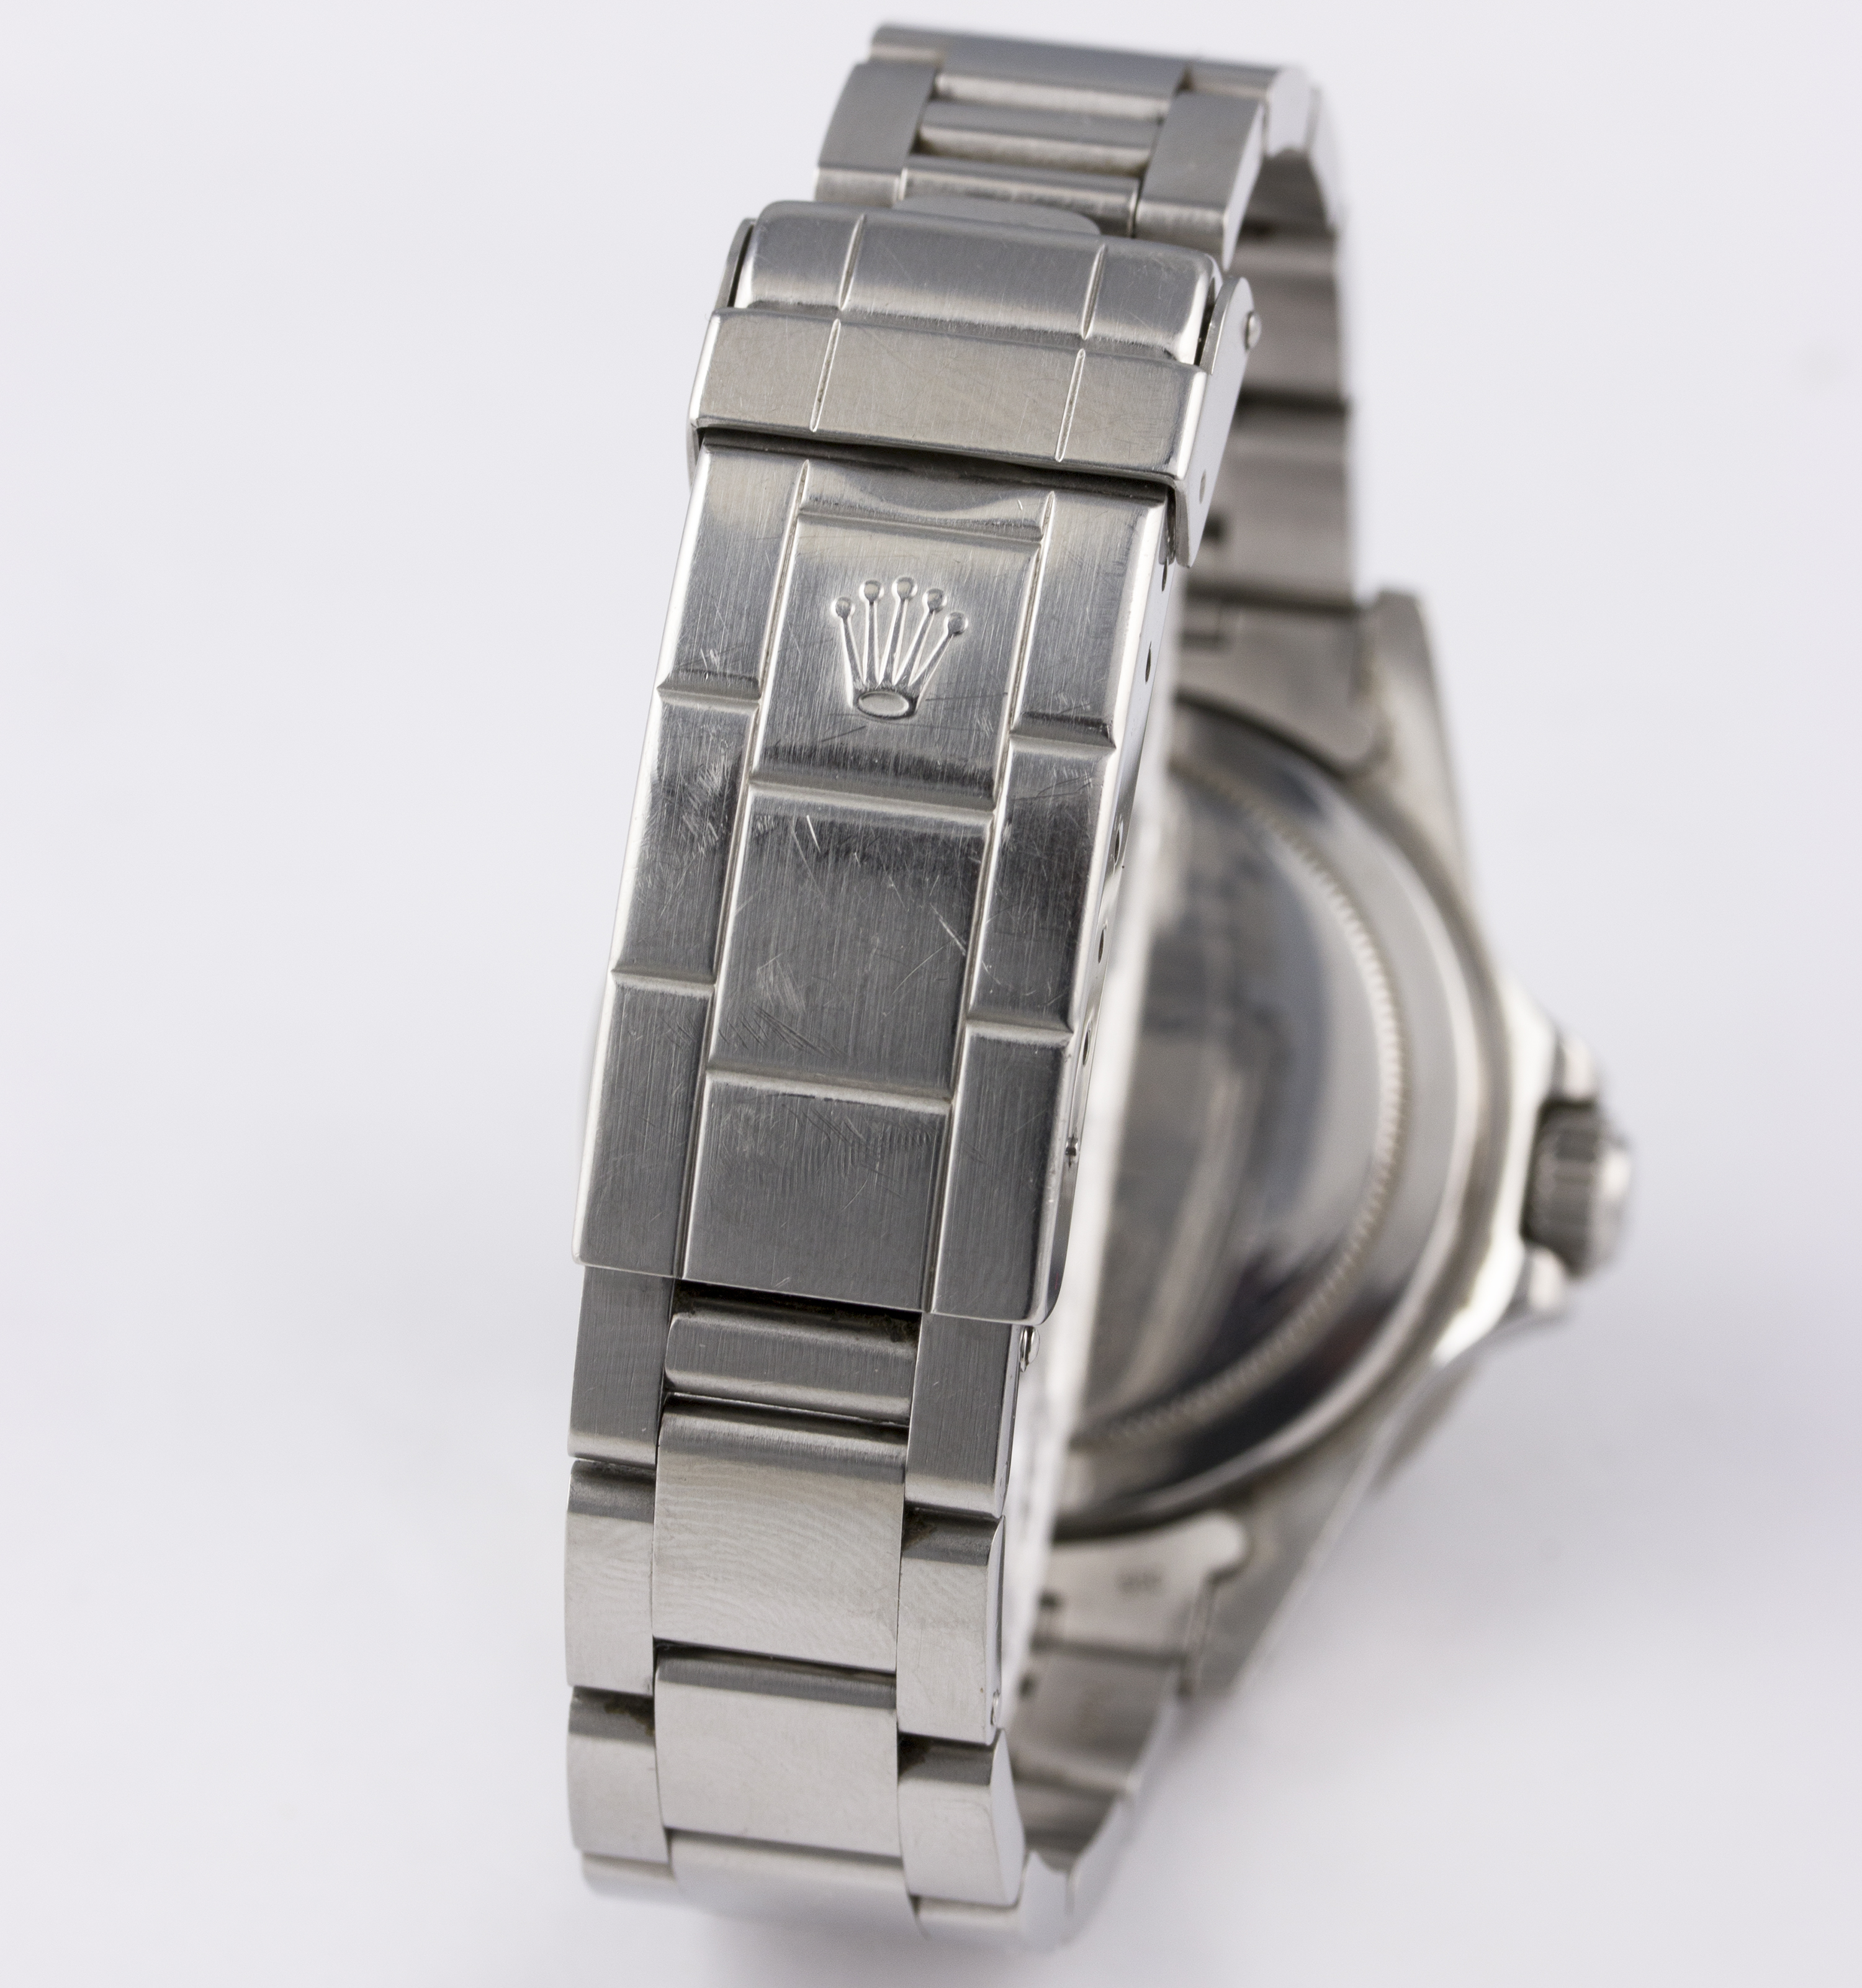 A GENTLEMAN'S STAINLESS STEEL ROLEX OYSTER PERPETUAL SUBMARINER CHRONOMETER BRACELET WATCH CIRCA - Image 6 of 9